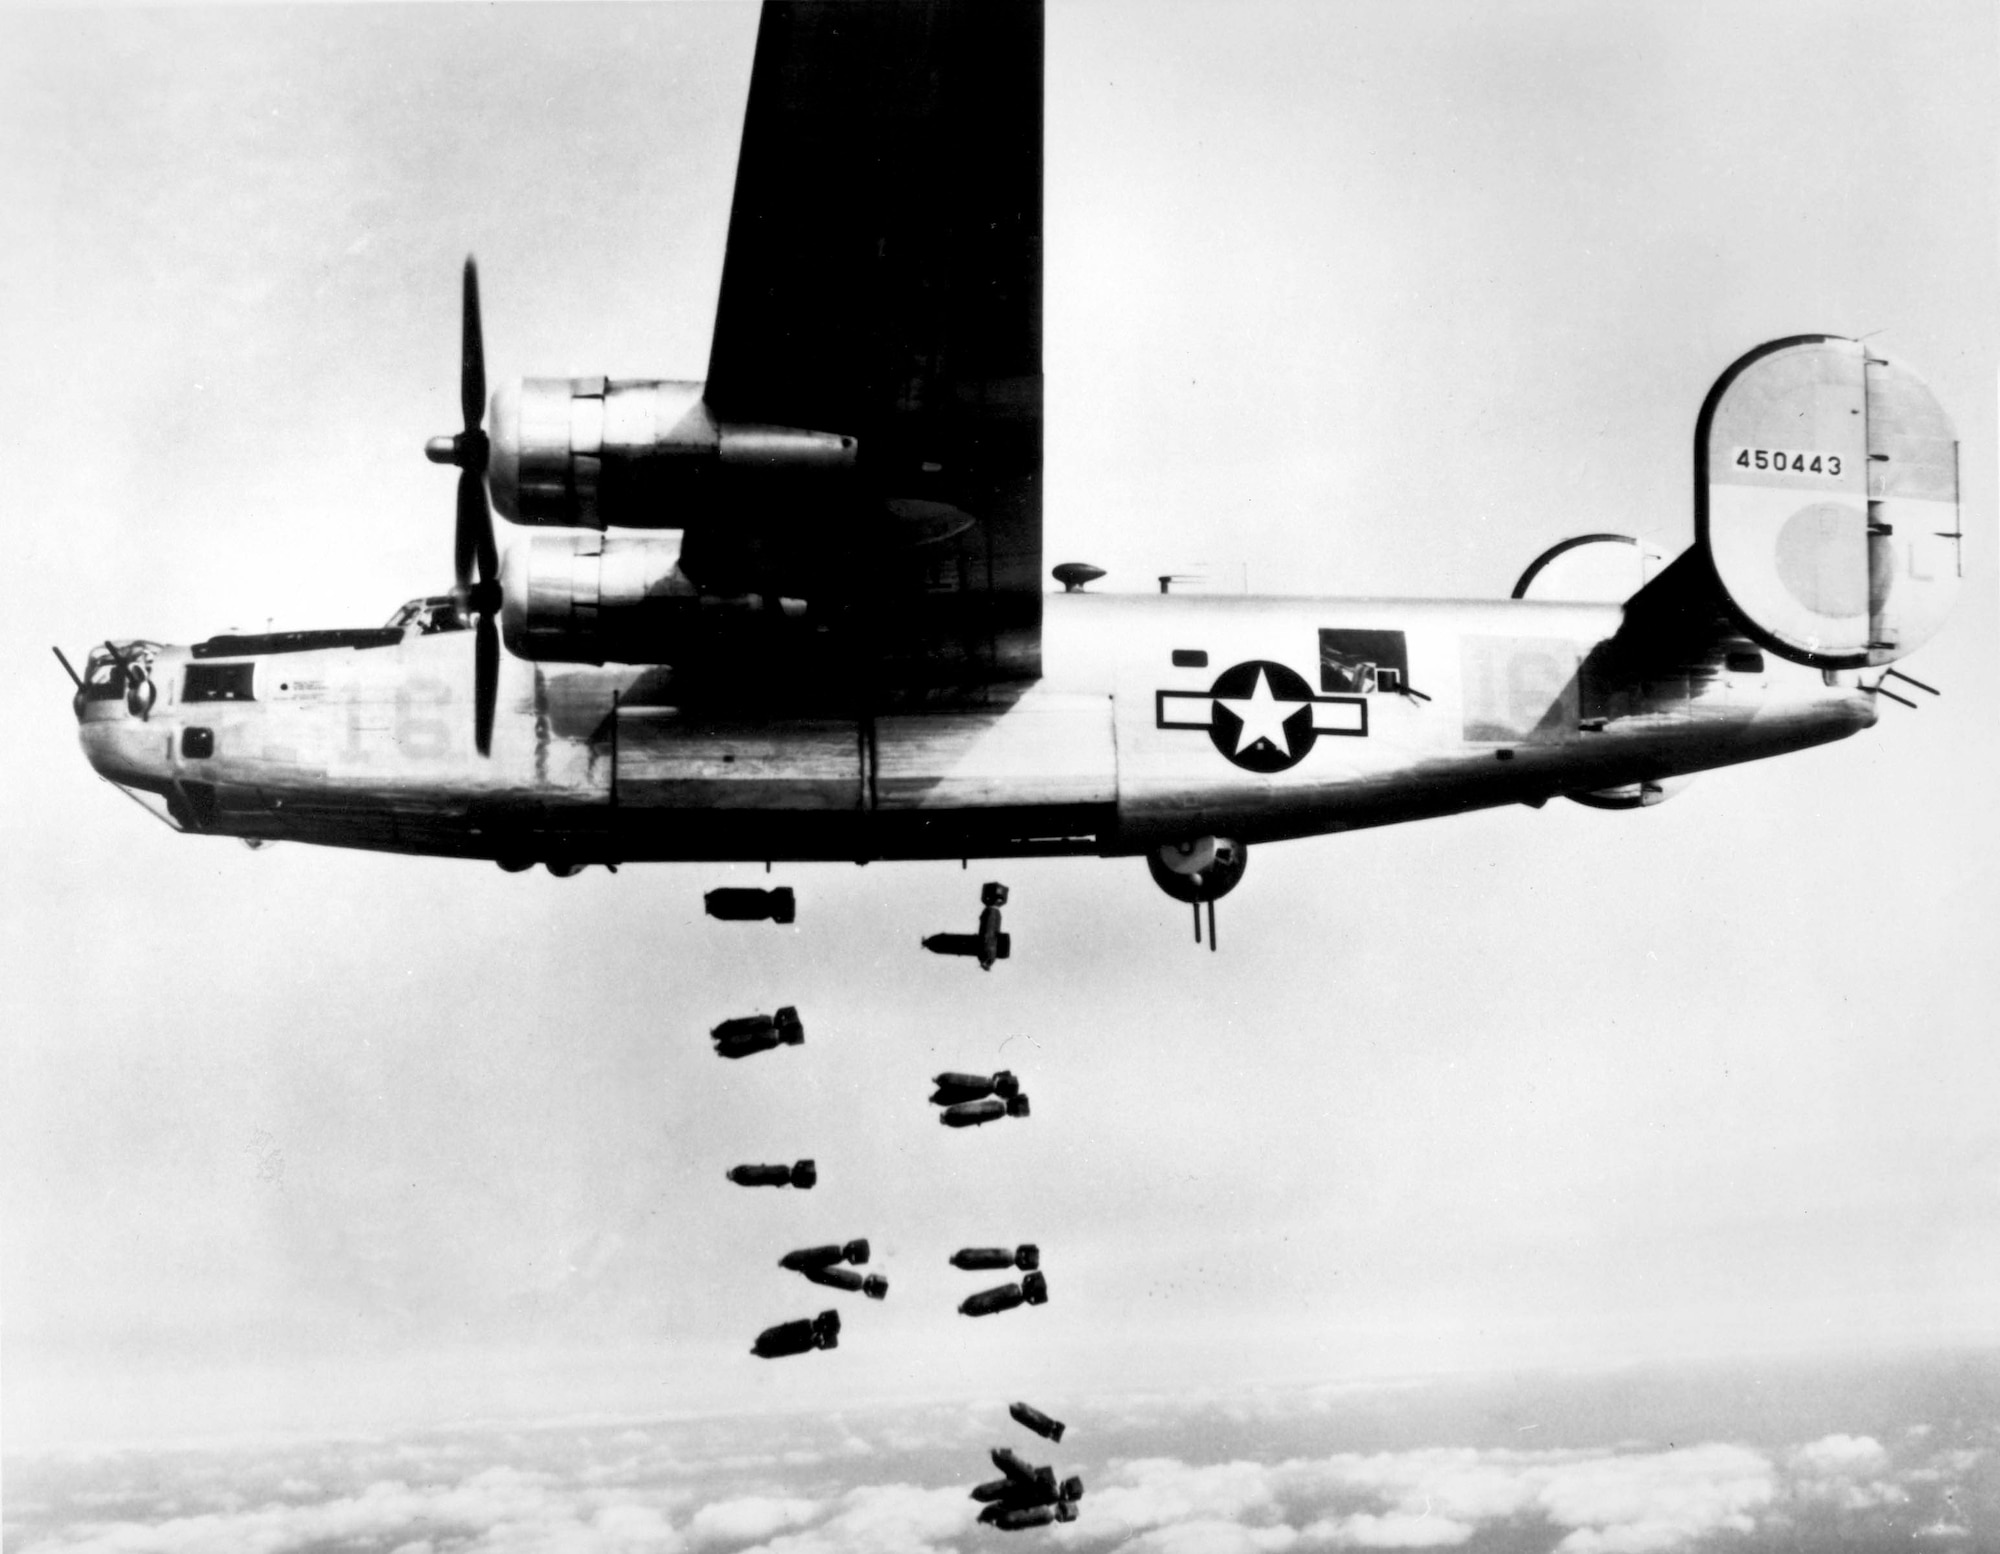 World War II bomber crews faced the constant threat of enemy fighters and "flak" during their missions over occupied Europe, much like the crew of this B-24 Liberator on a bombing mission over Germany in 1945.  Airmen faced capture by the German military when they were forced to parachute from damaged aircraft. (U.S. Air Force photo)